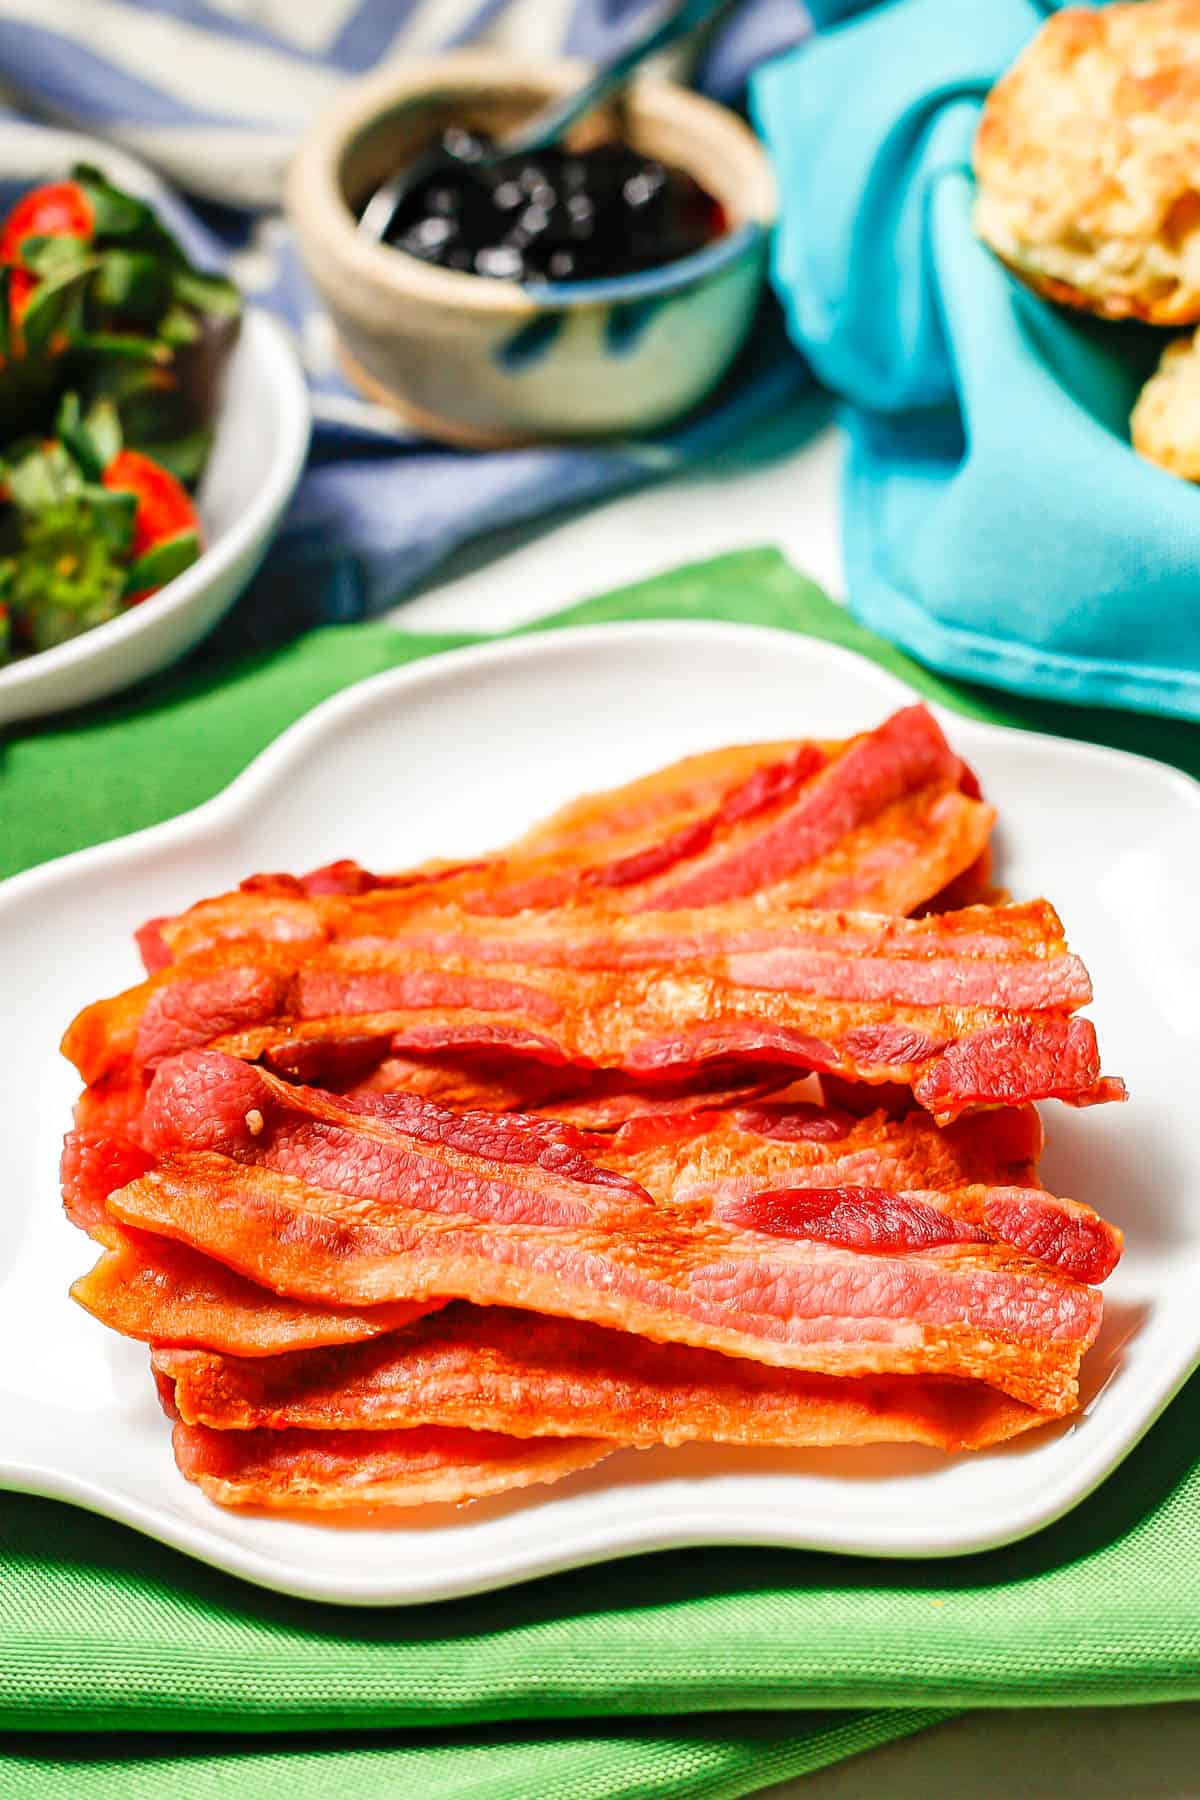 A stack of strips of cooked bacon served on a white plate set on green napkins with fruit and biscuits nearby.